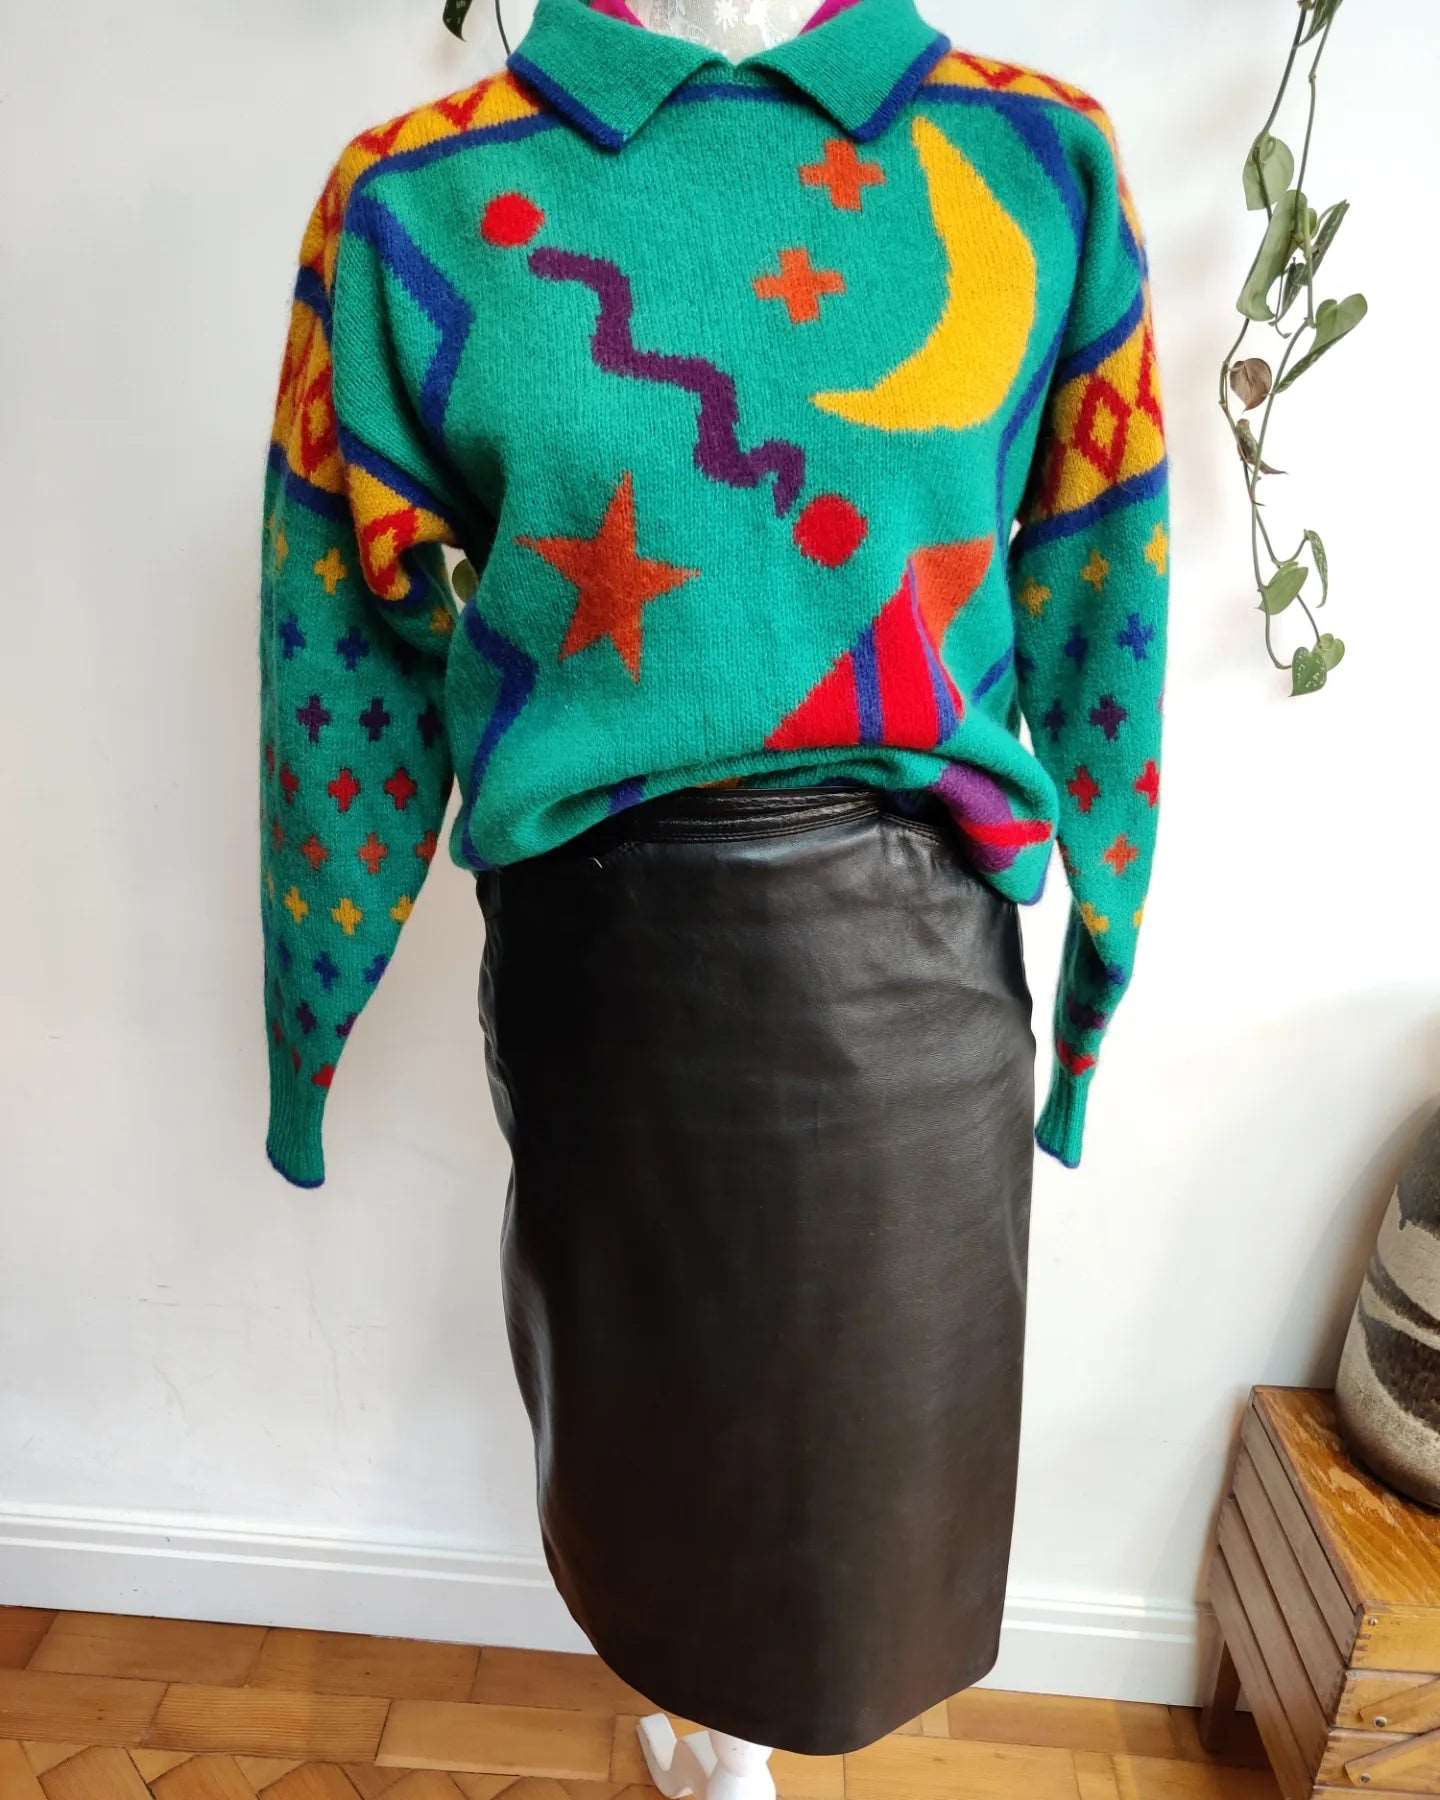 Fabulous vintage rainbow jumper. Looks good with trousers or skirts.